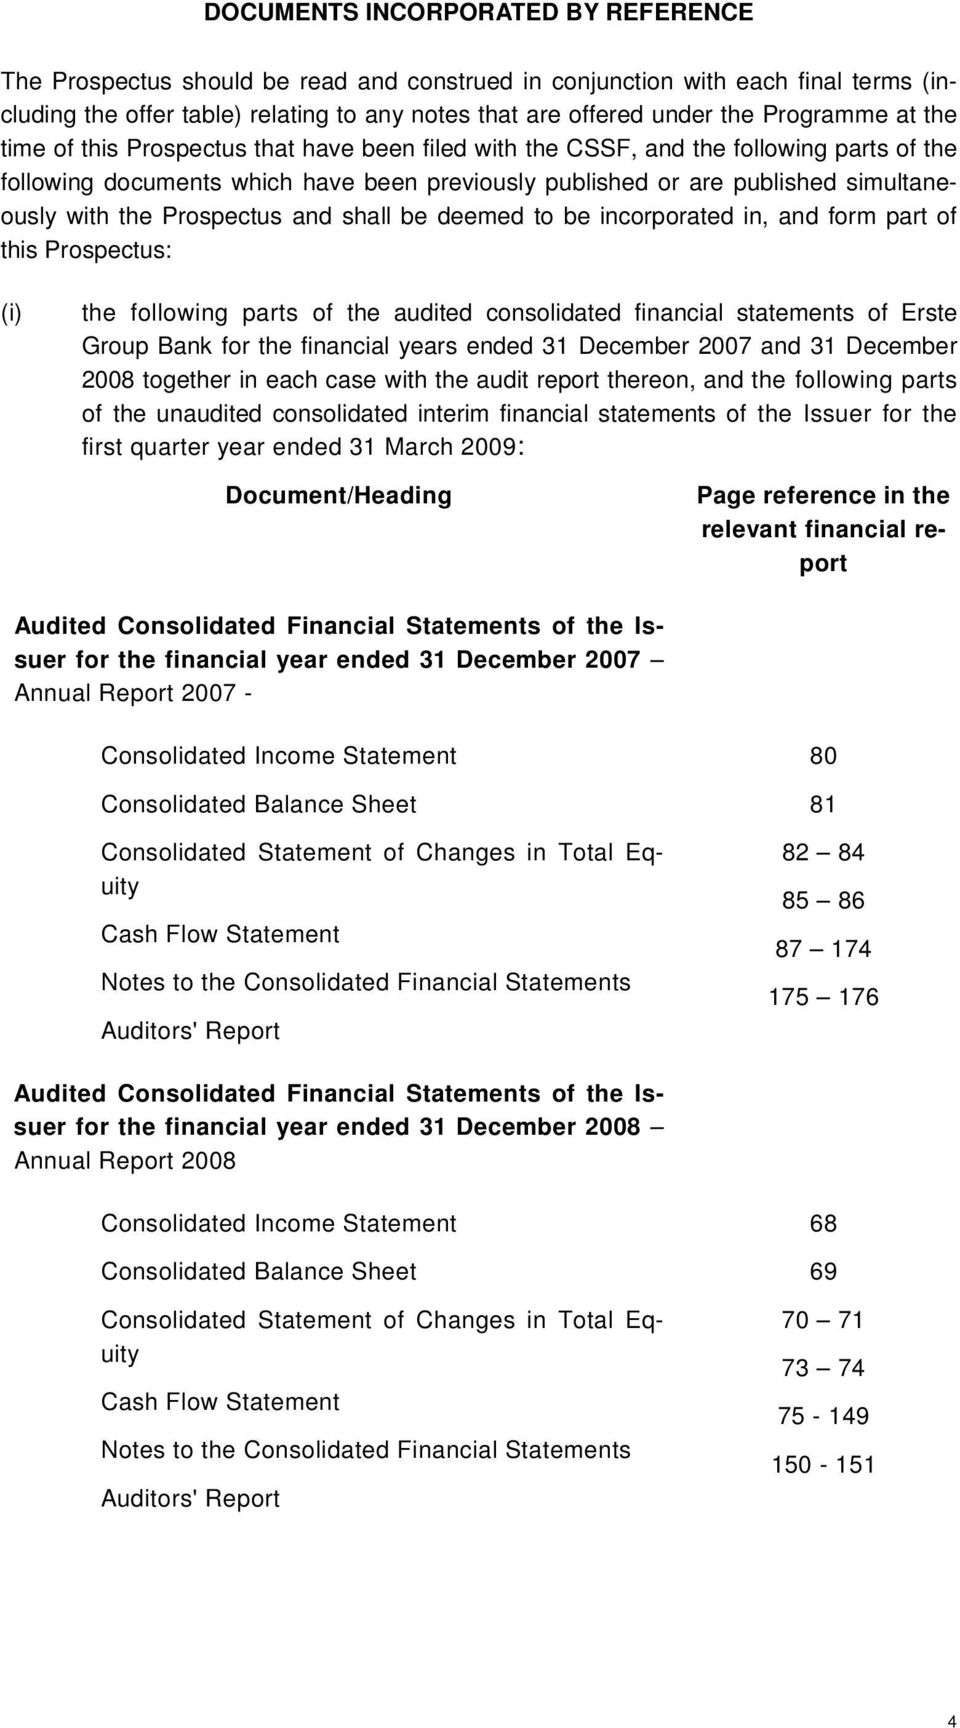 with the Prospectus and shall be deemed to be incorporated in, and form part of this Prospectus: (i) the following parts of the audited consolidated financial statements of Erste Group Bank for the